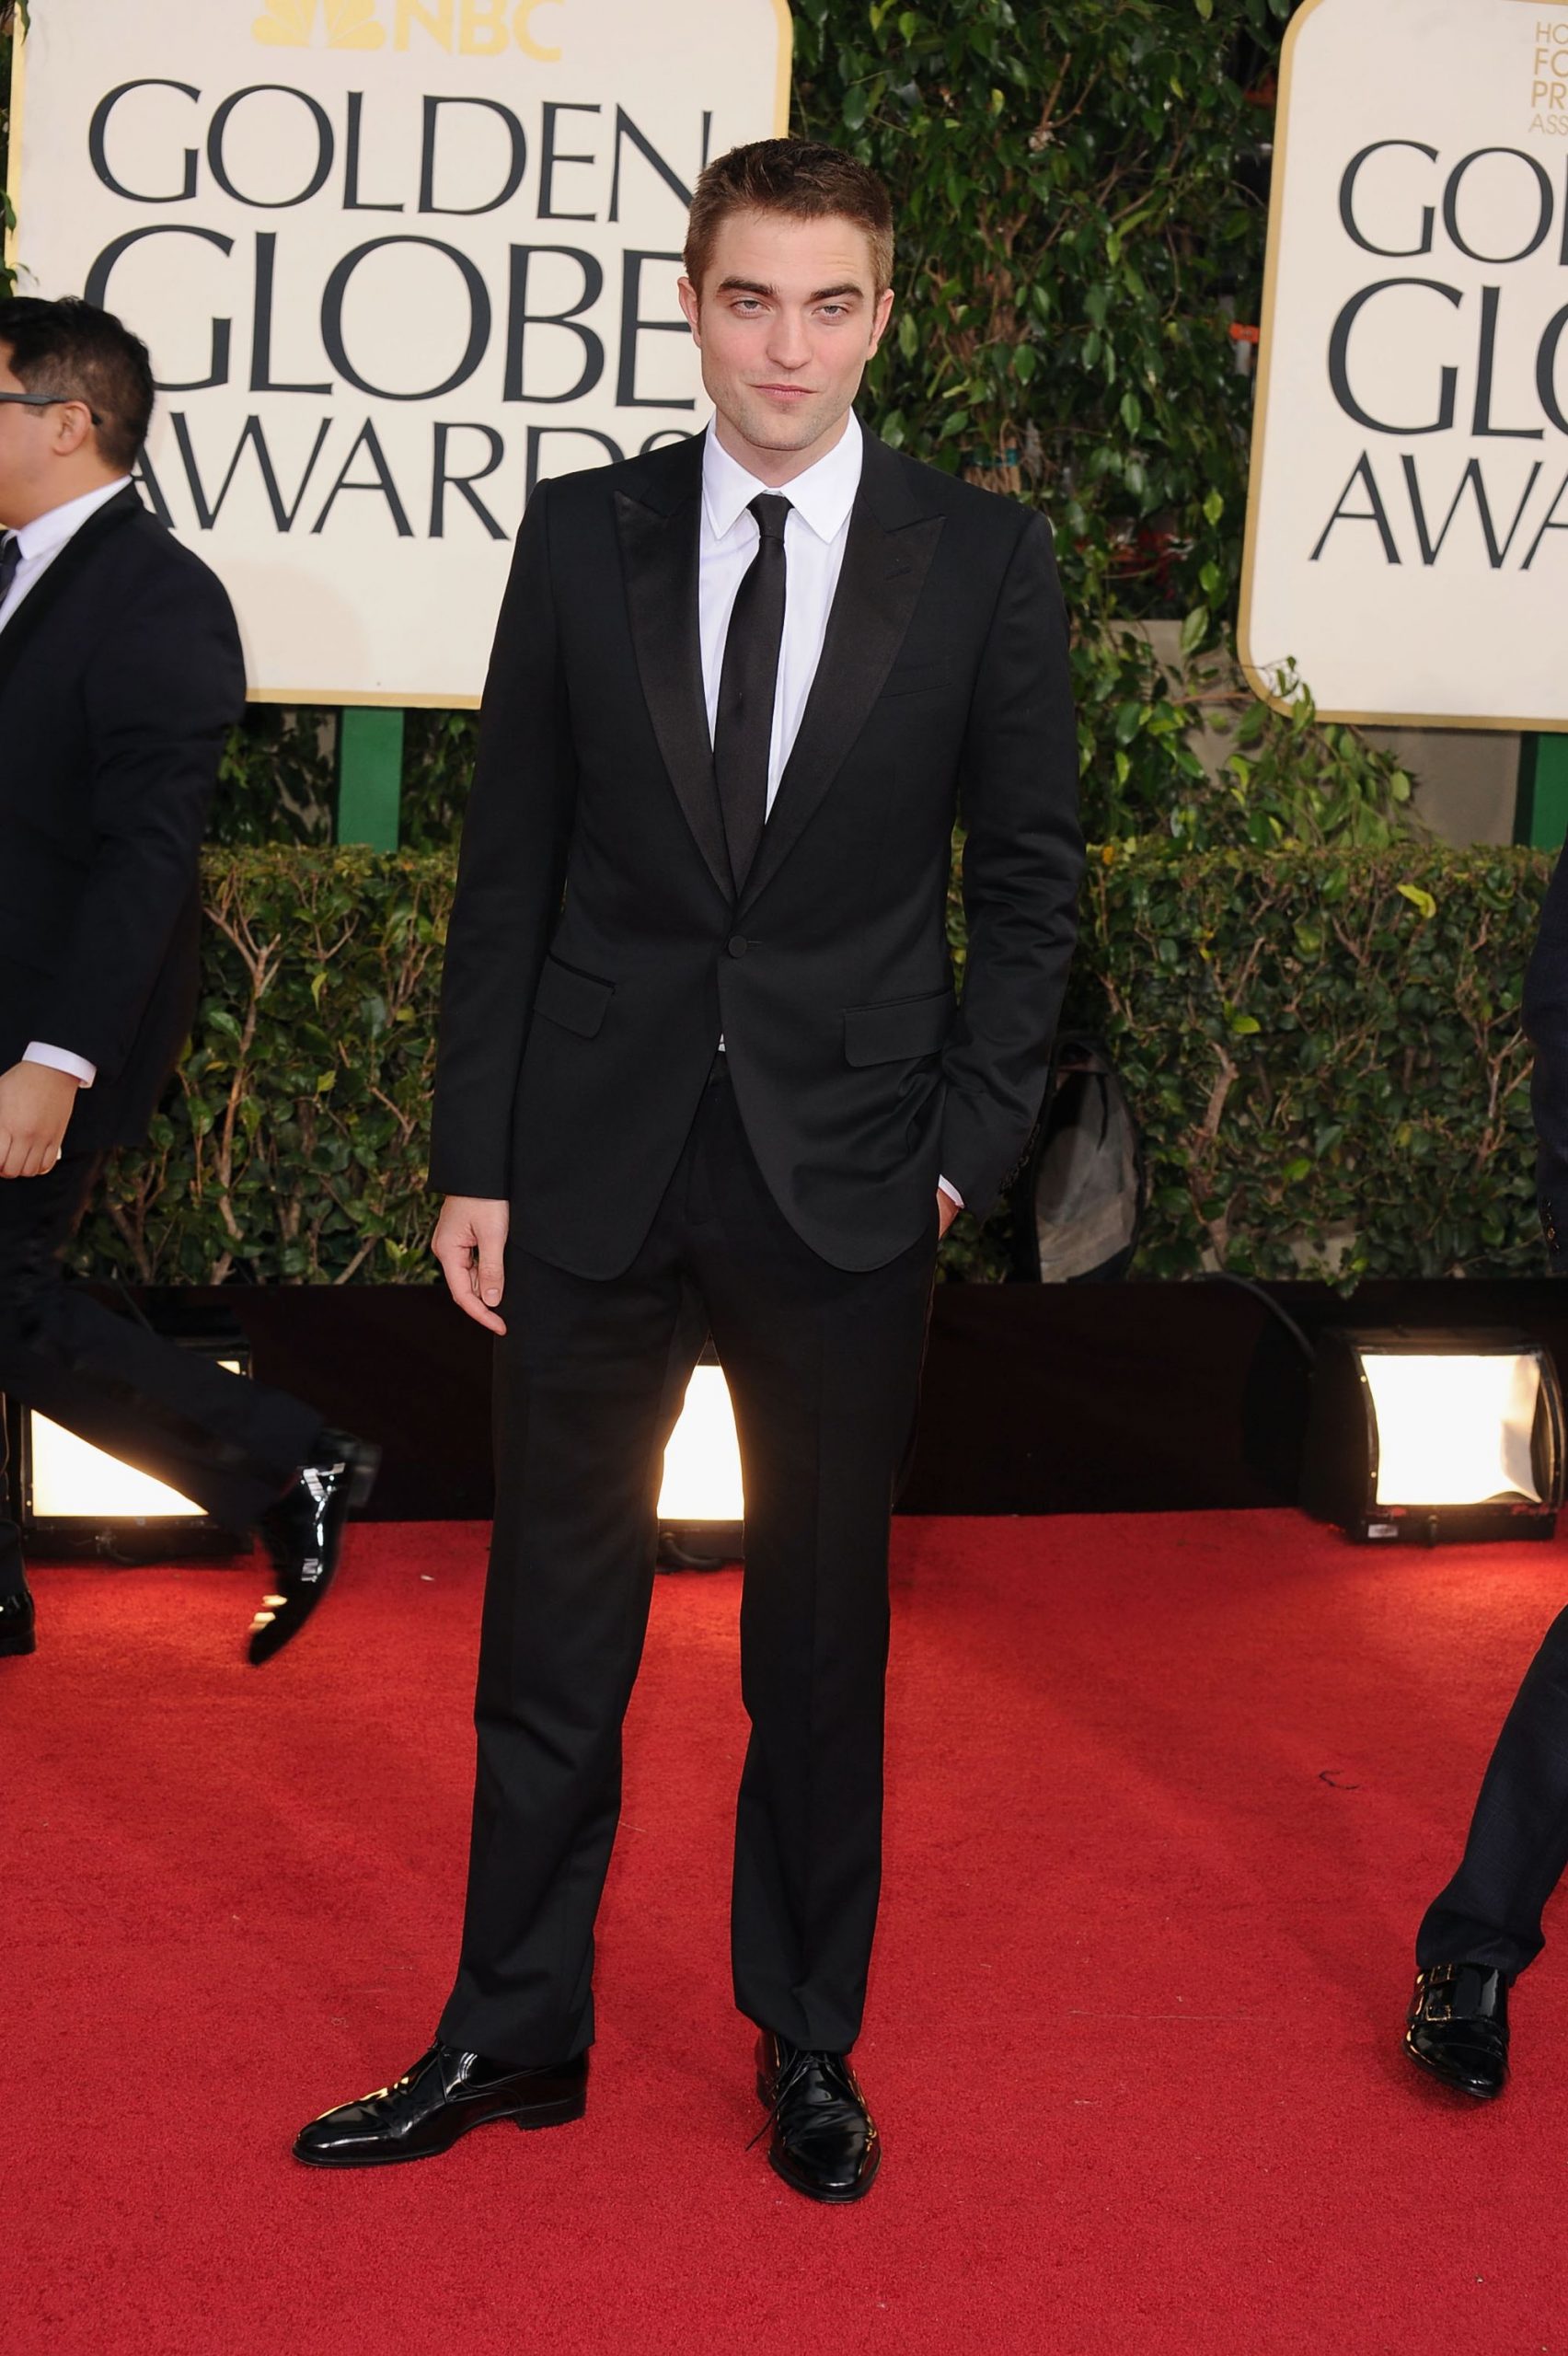 Robert Pattinson in Gucci at the 70th Annual Golden Globe Awards (Photo courtesy | Gucci/Getty Images)